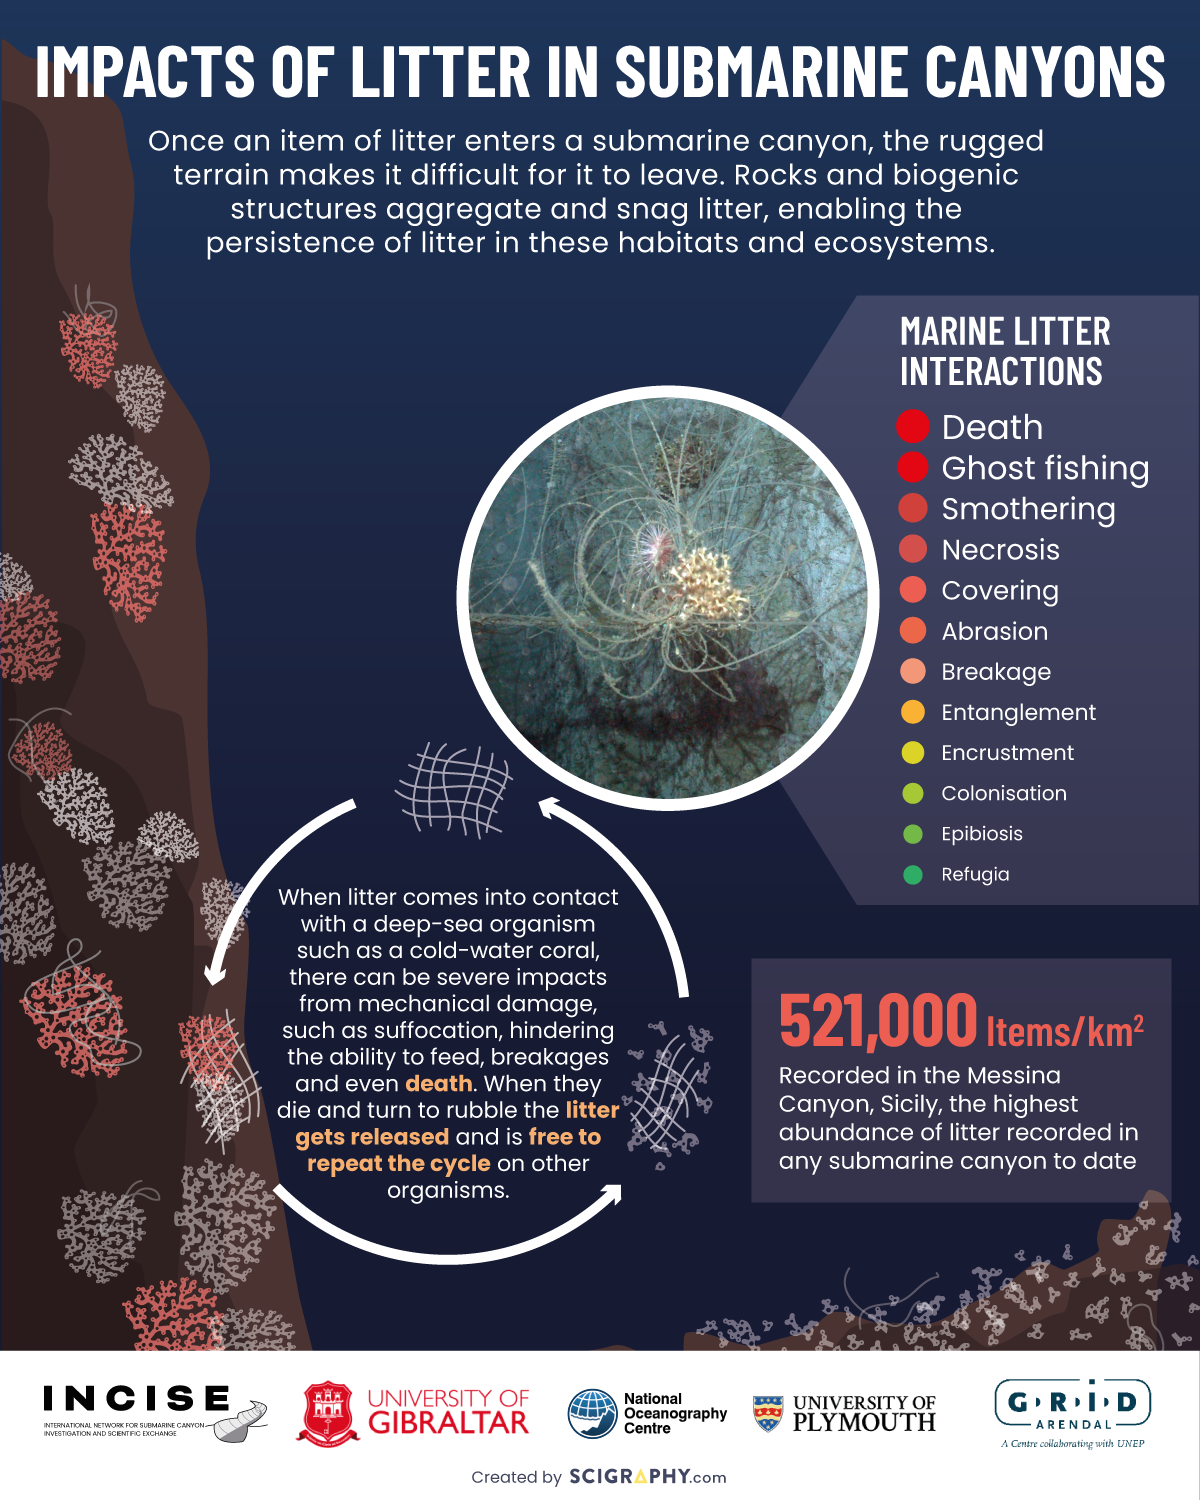 Marine litter impacts in submarine canyons